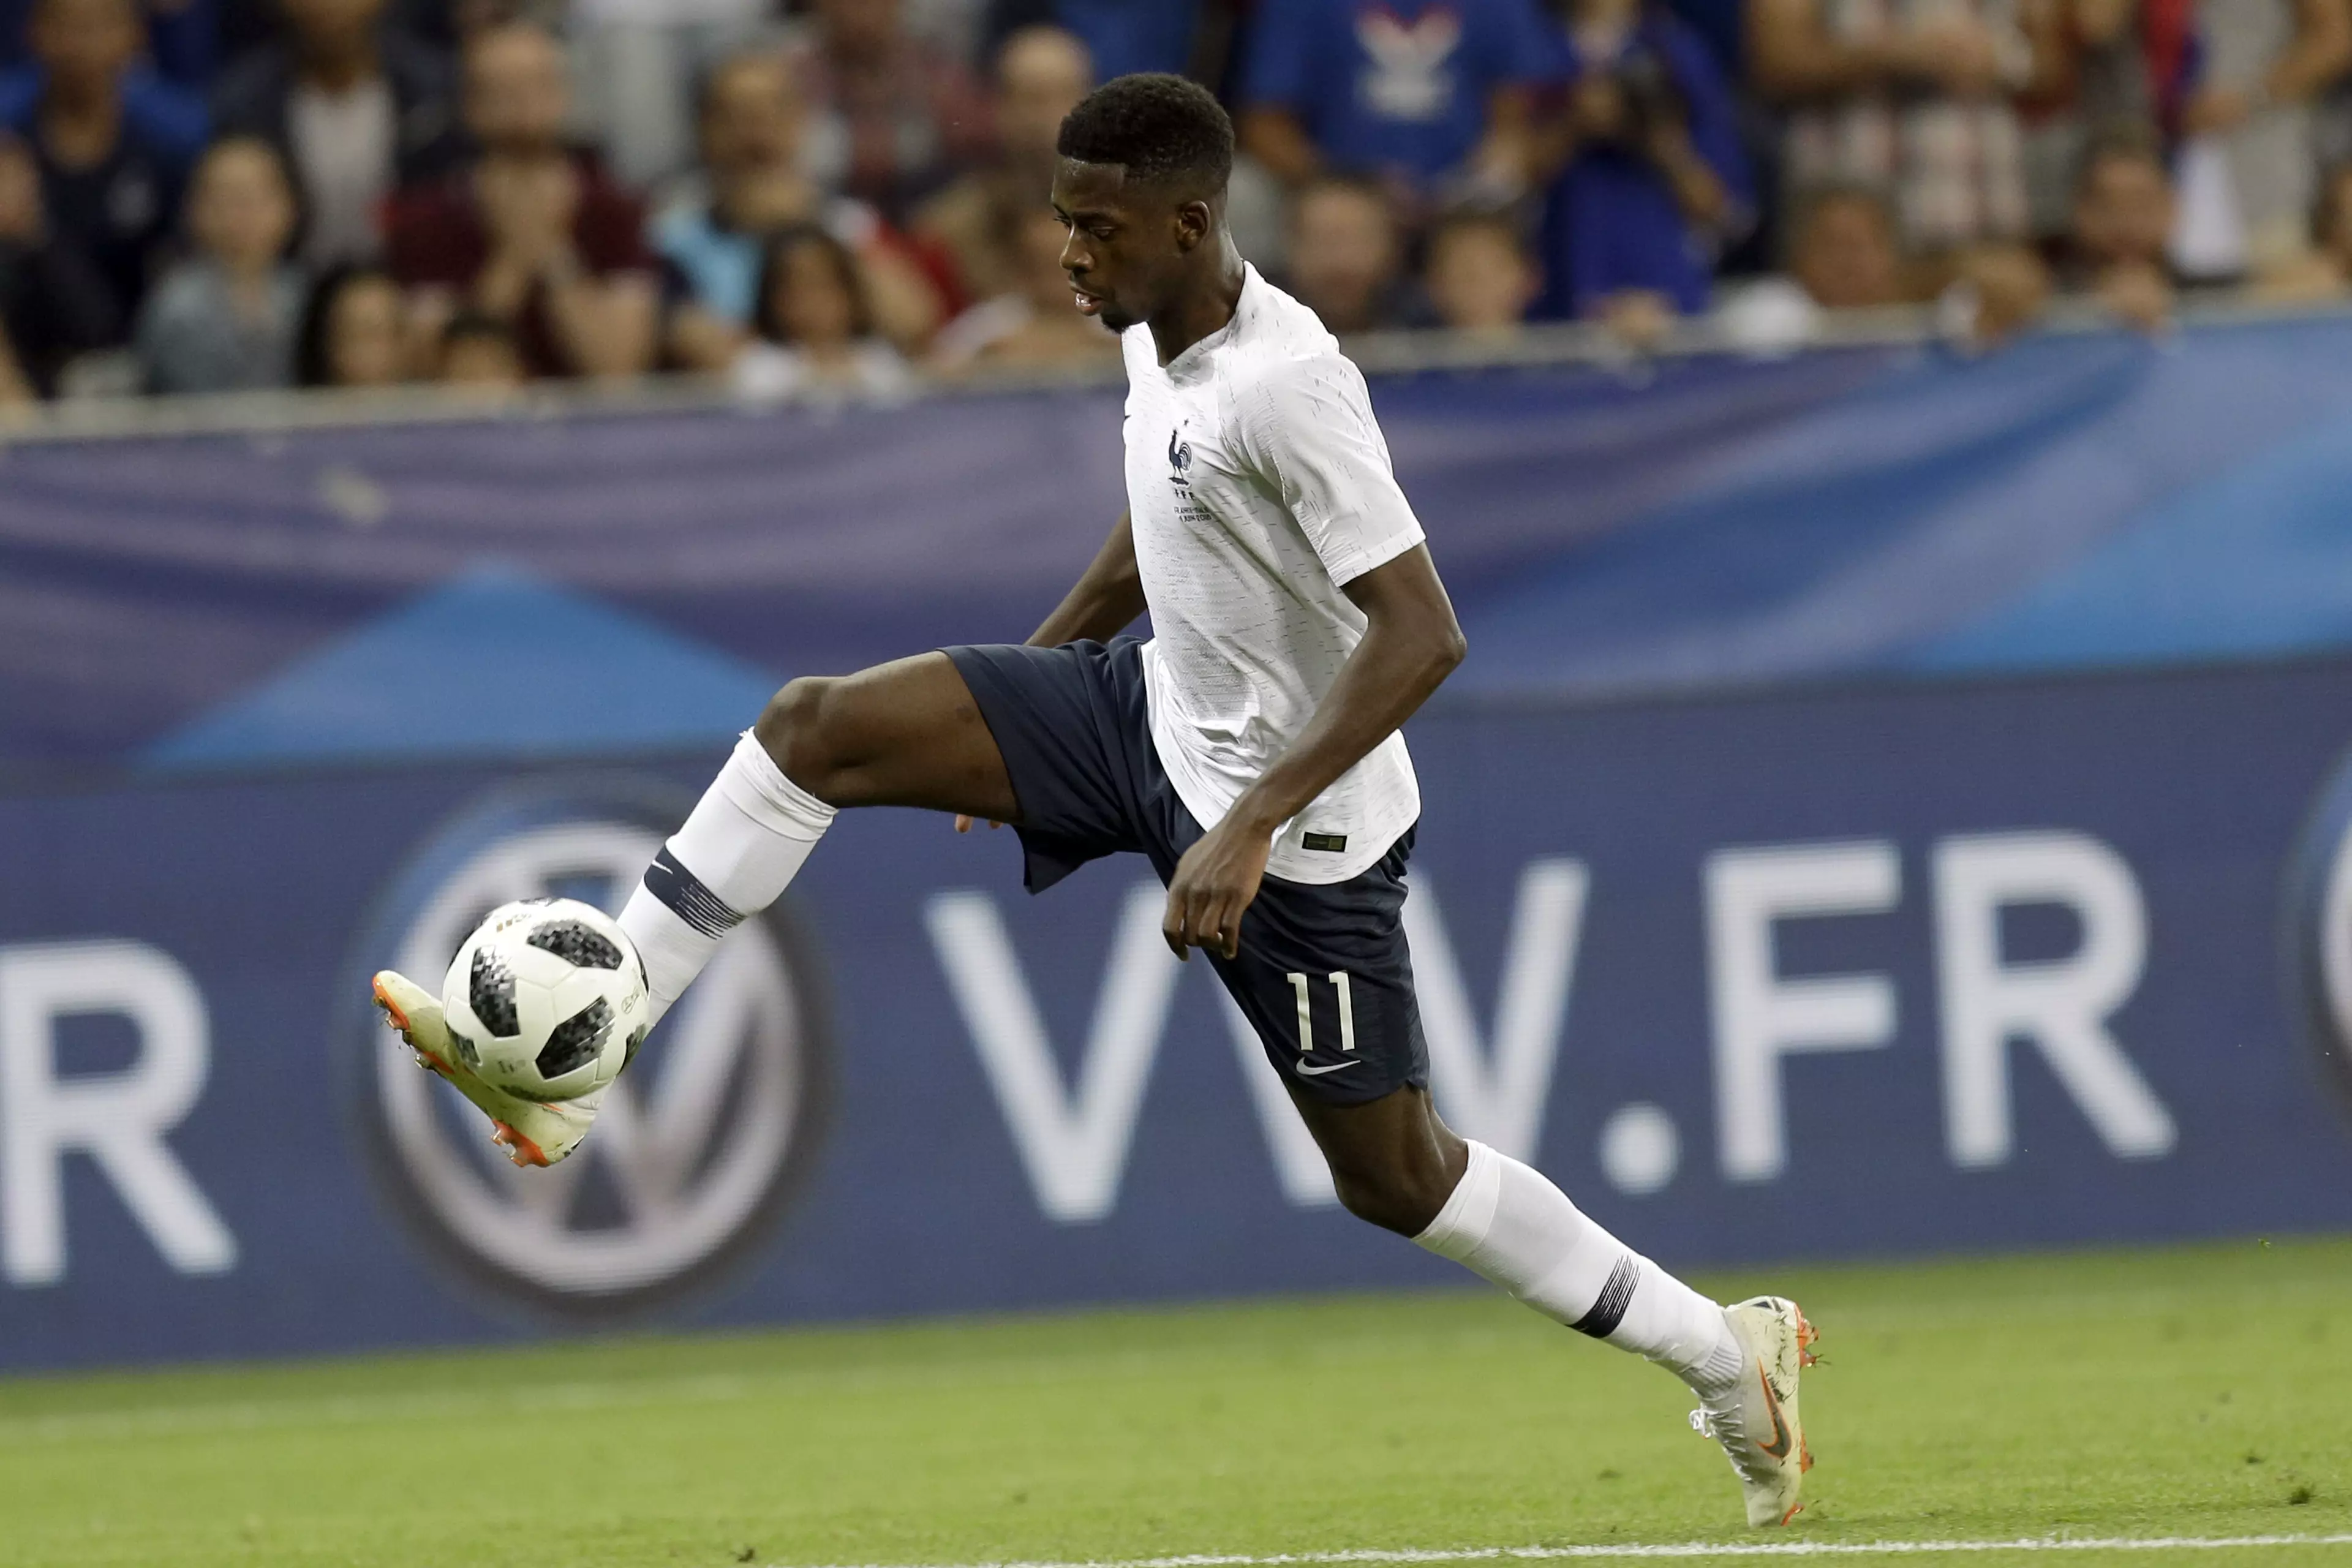 Is Dembele the best young player right now? Image: PA Images